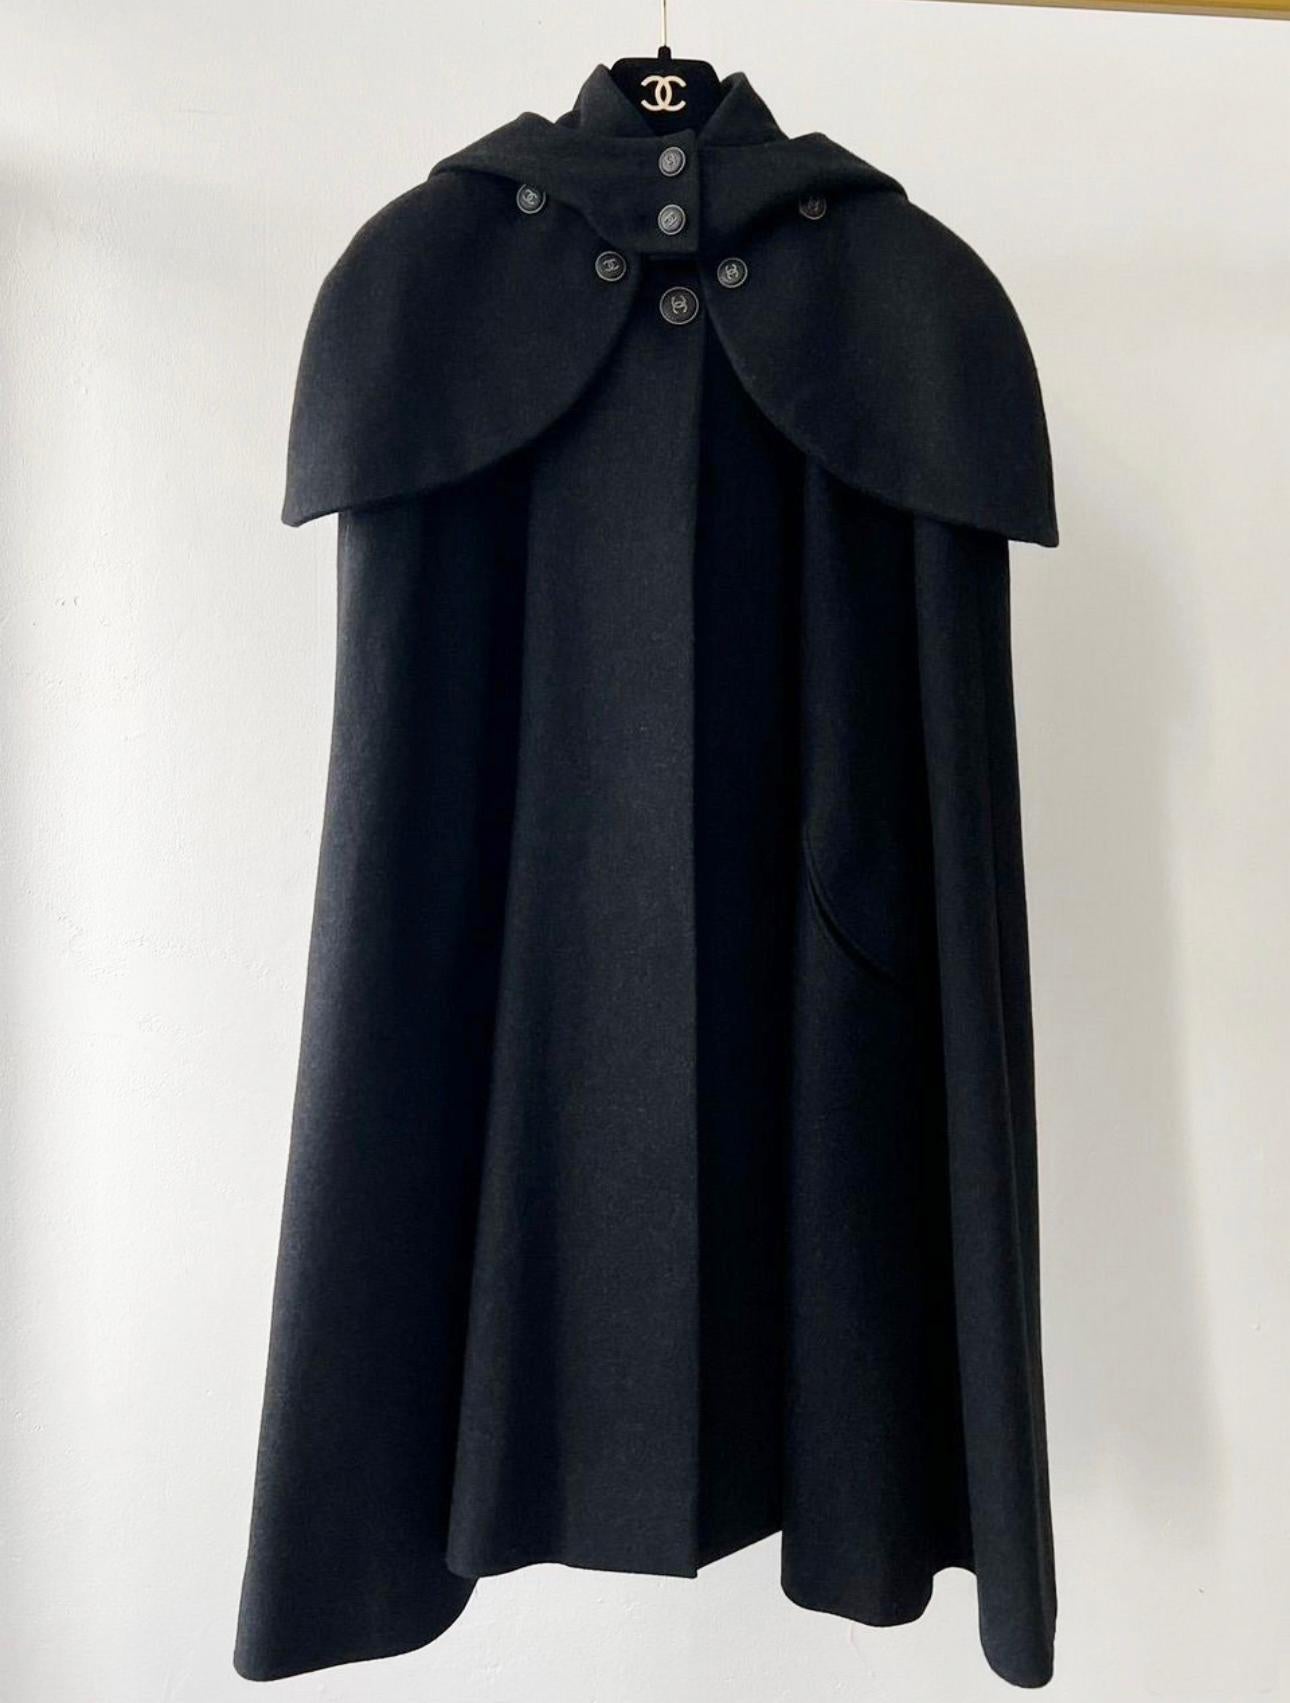 Collectible Chanel black cashmere cape coat with CC logo buttons. Boutique price was ca. 9,000$
Tonal silk lining with camellias
Size mark 36 FR. Never worn.